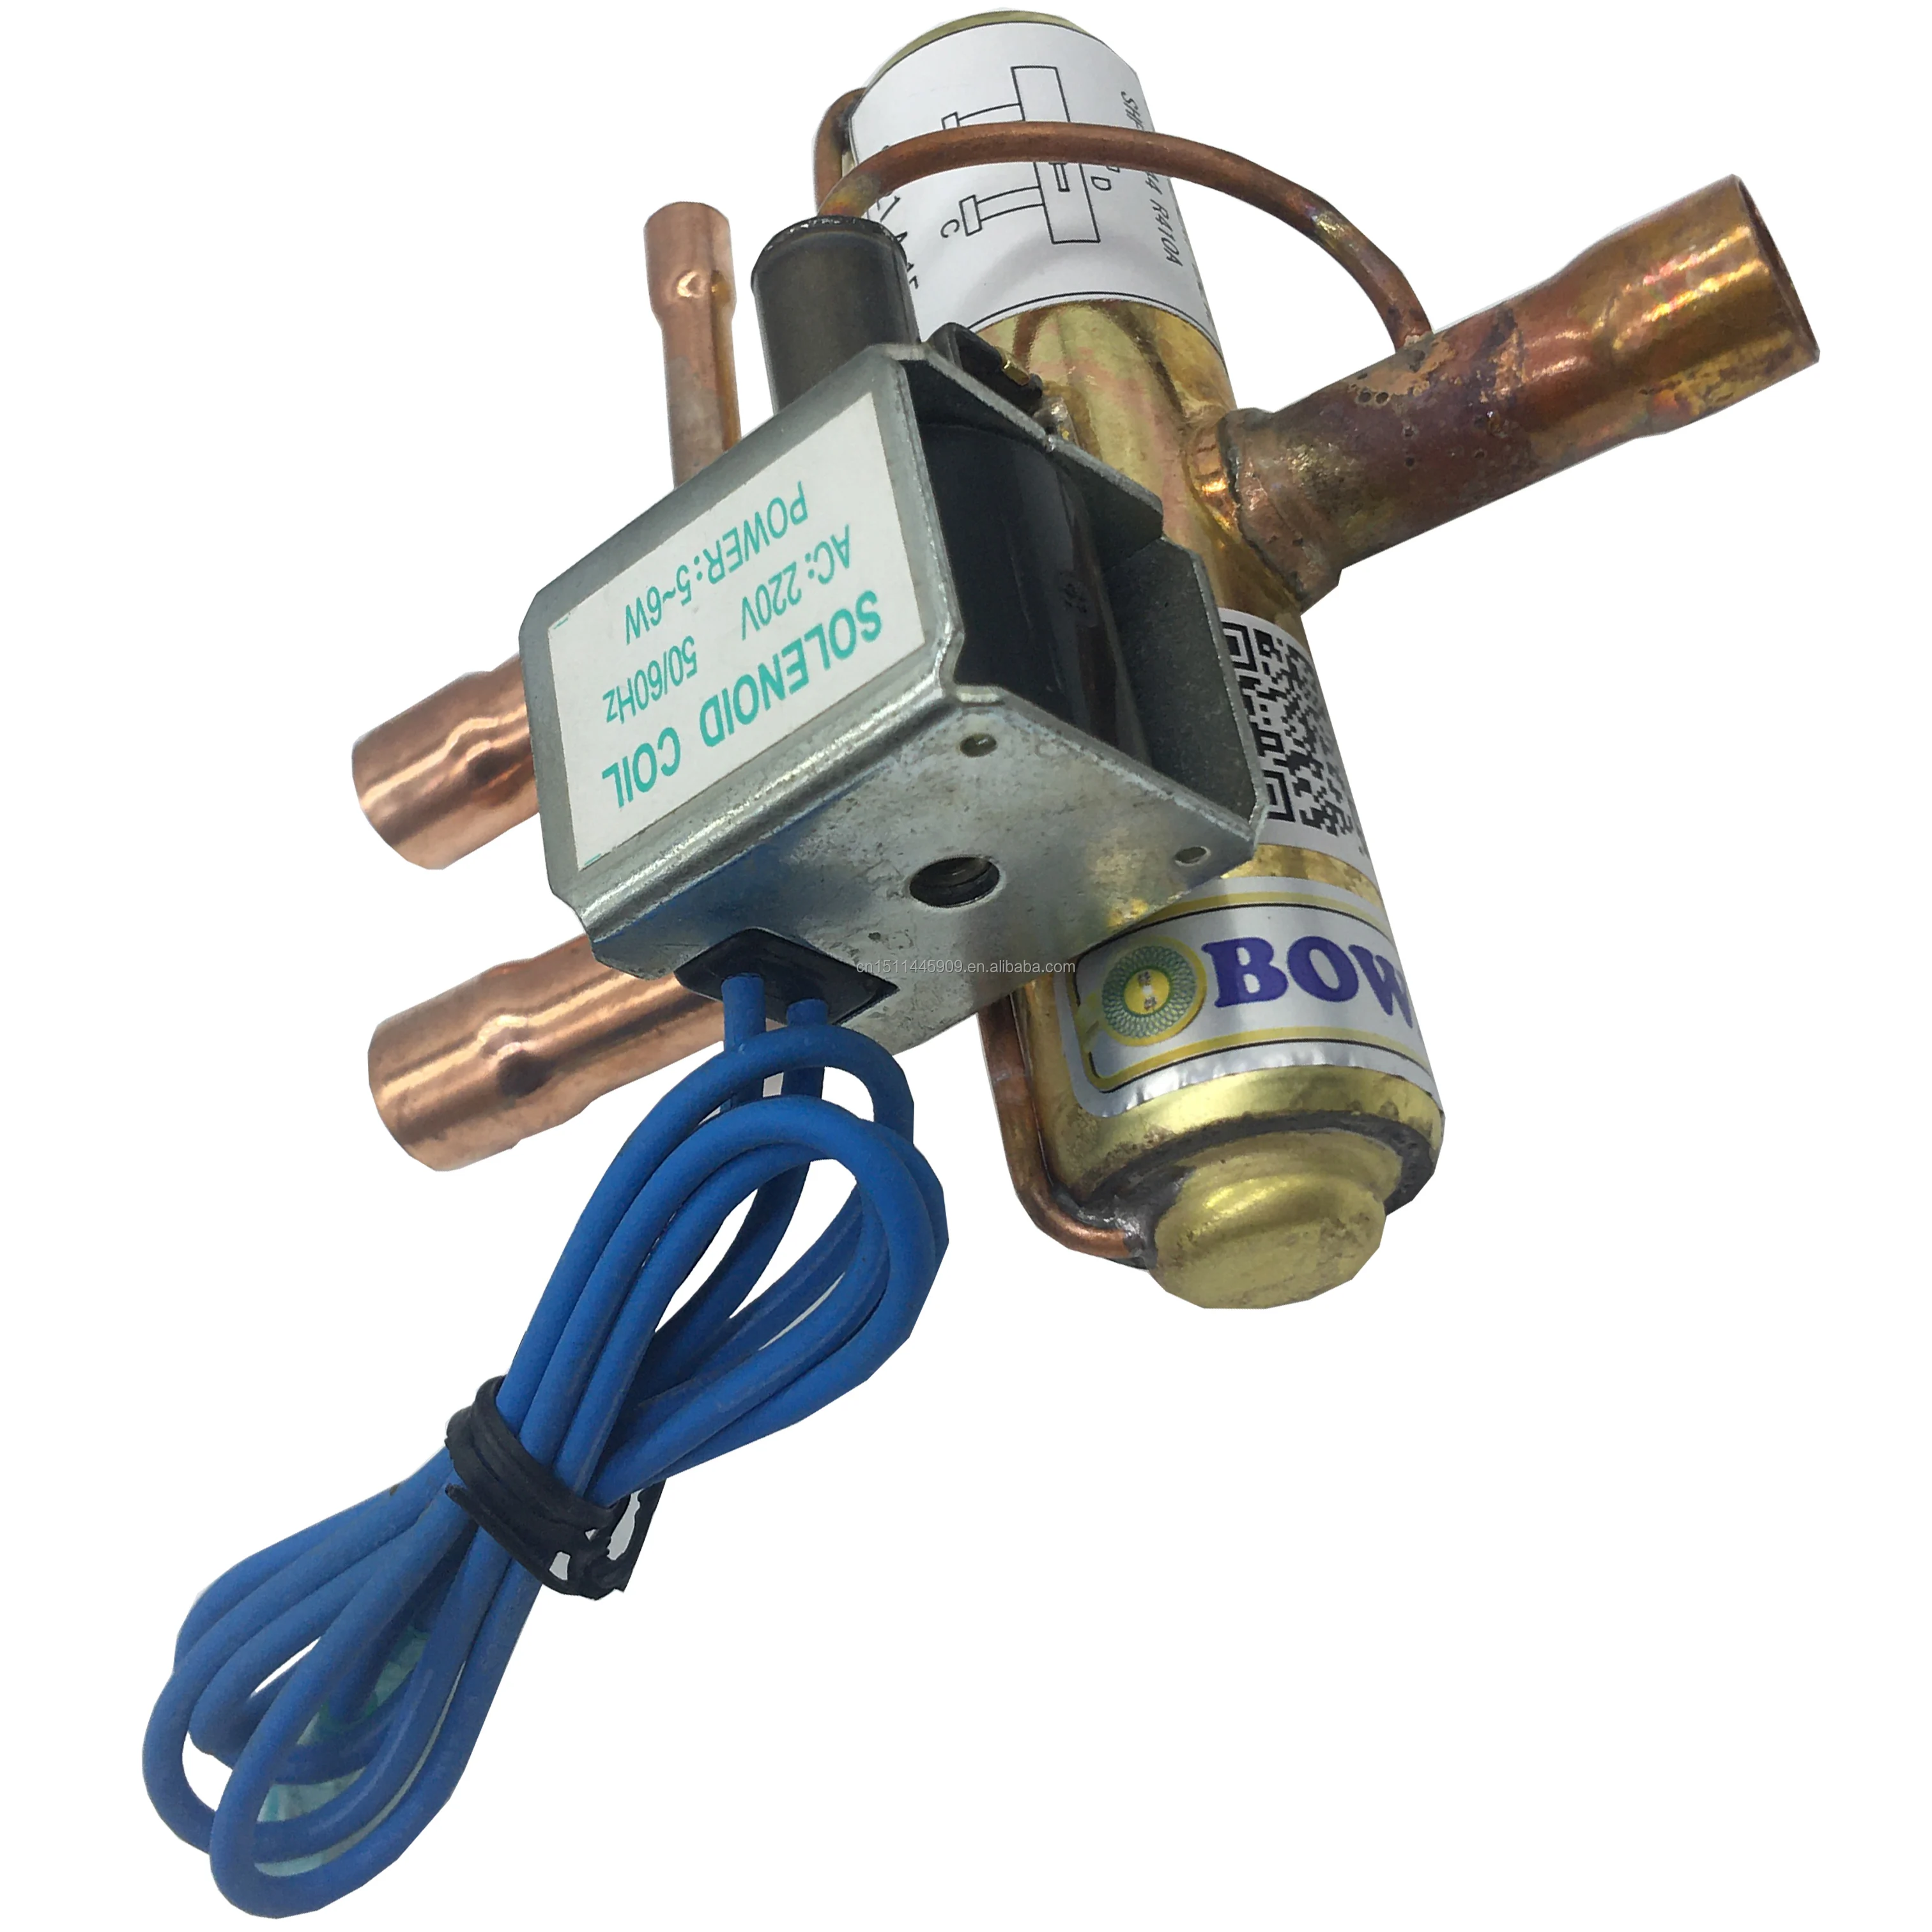 1/2" Solenoid Reverse Valve Is Used To Reclaim Cooling In Heat Pumps Or Shift Primary And Secondary Condensers/evaporators In Ac - Reverse Valves Shift Primary And Secondary Condenser To Keep Condensing